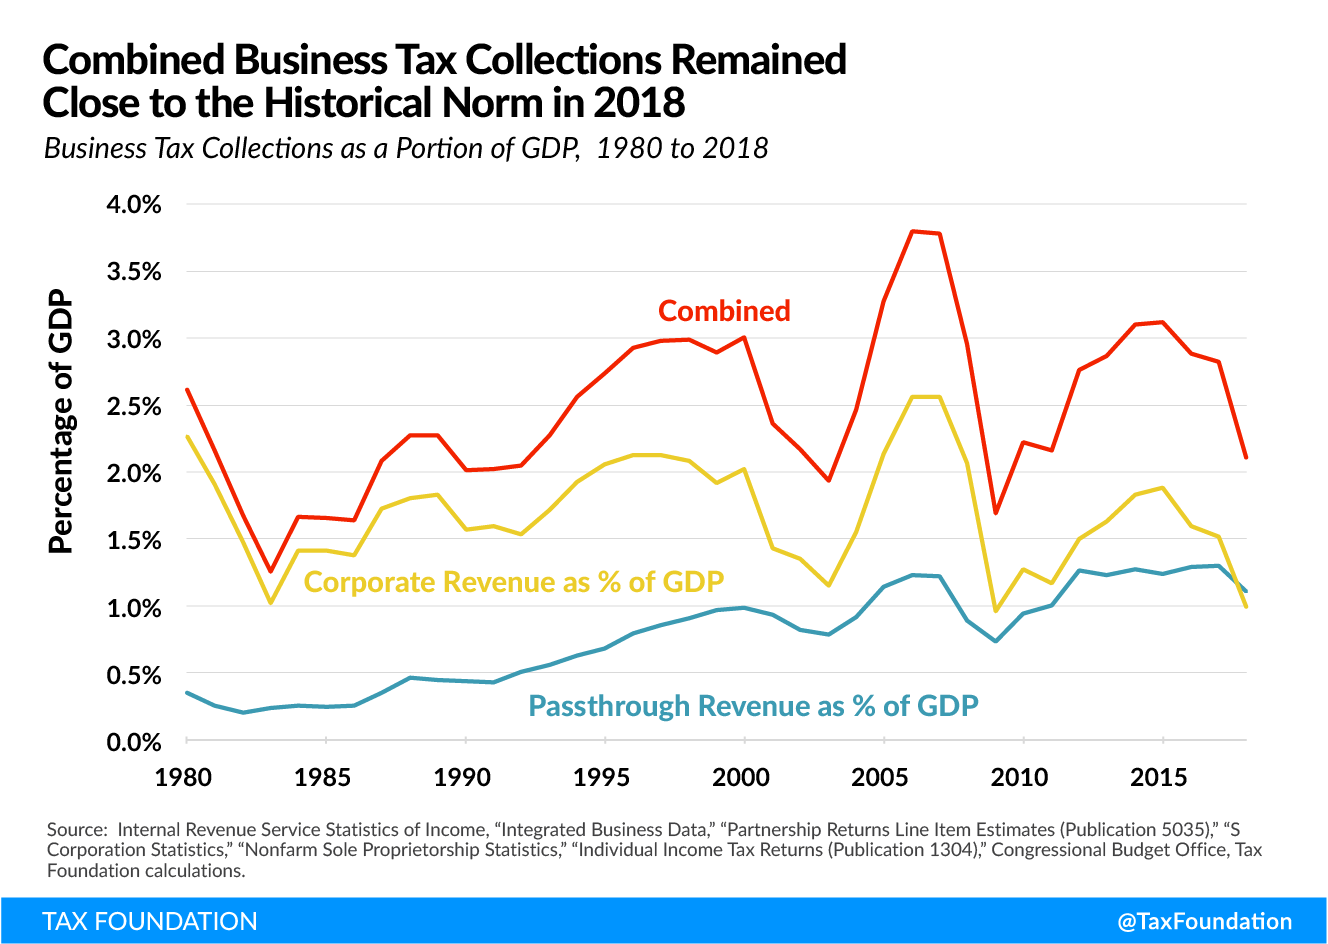 Corporate tax is most economically harmful, especially for workers, US corporate tax collections and US business tax collections historical Tax Fairness, Economic Growth, and Funding Government Investments (Fairer Tax System)